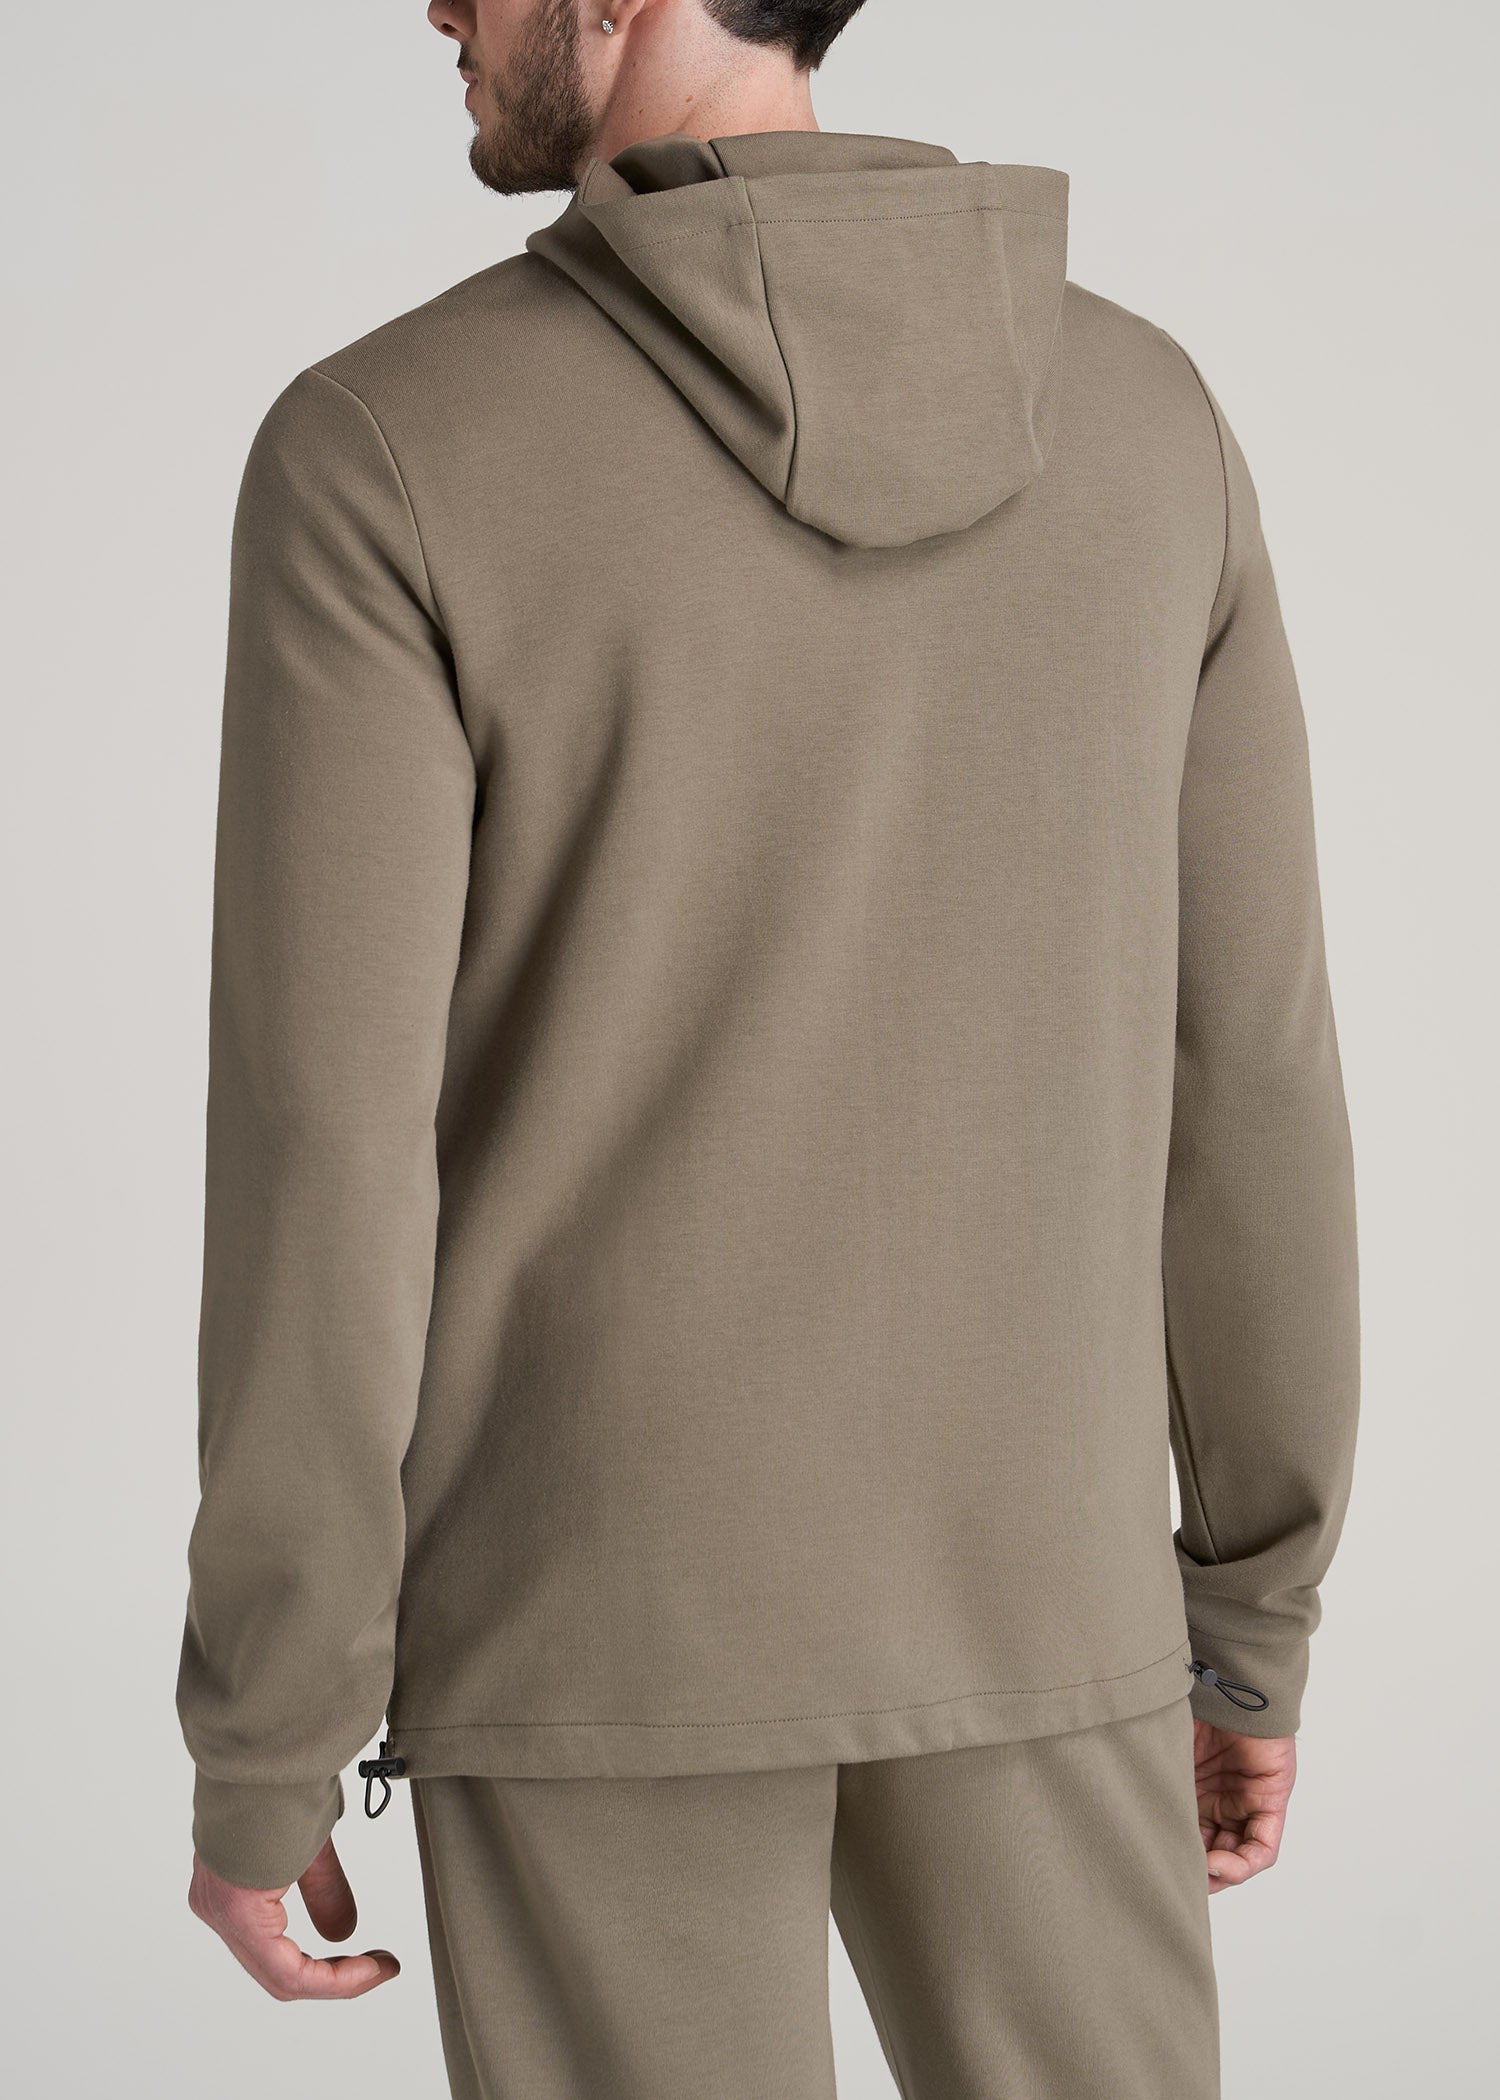 Tall Men's Tech-Knit Long Track Jacket in Deep Taupe